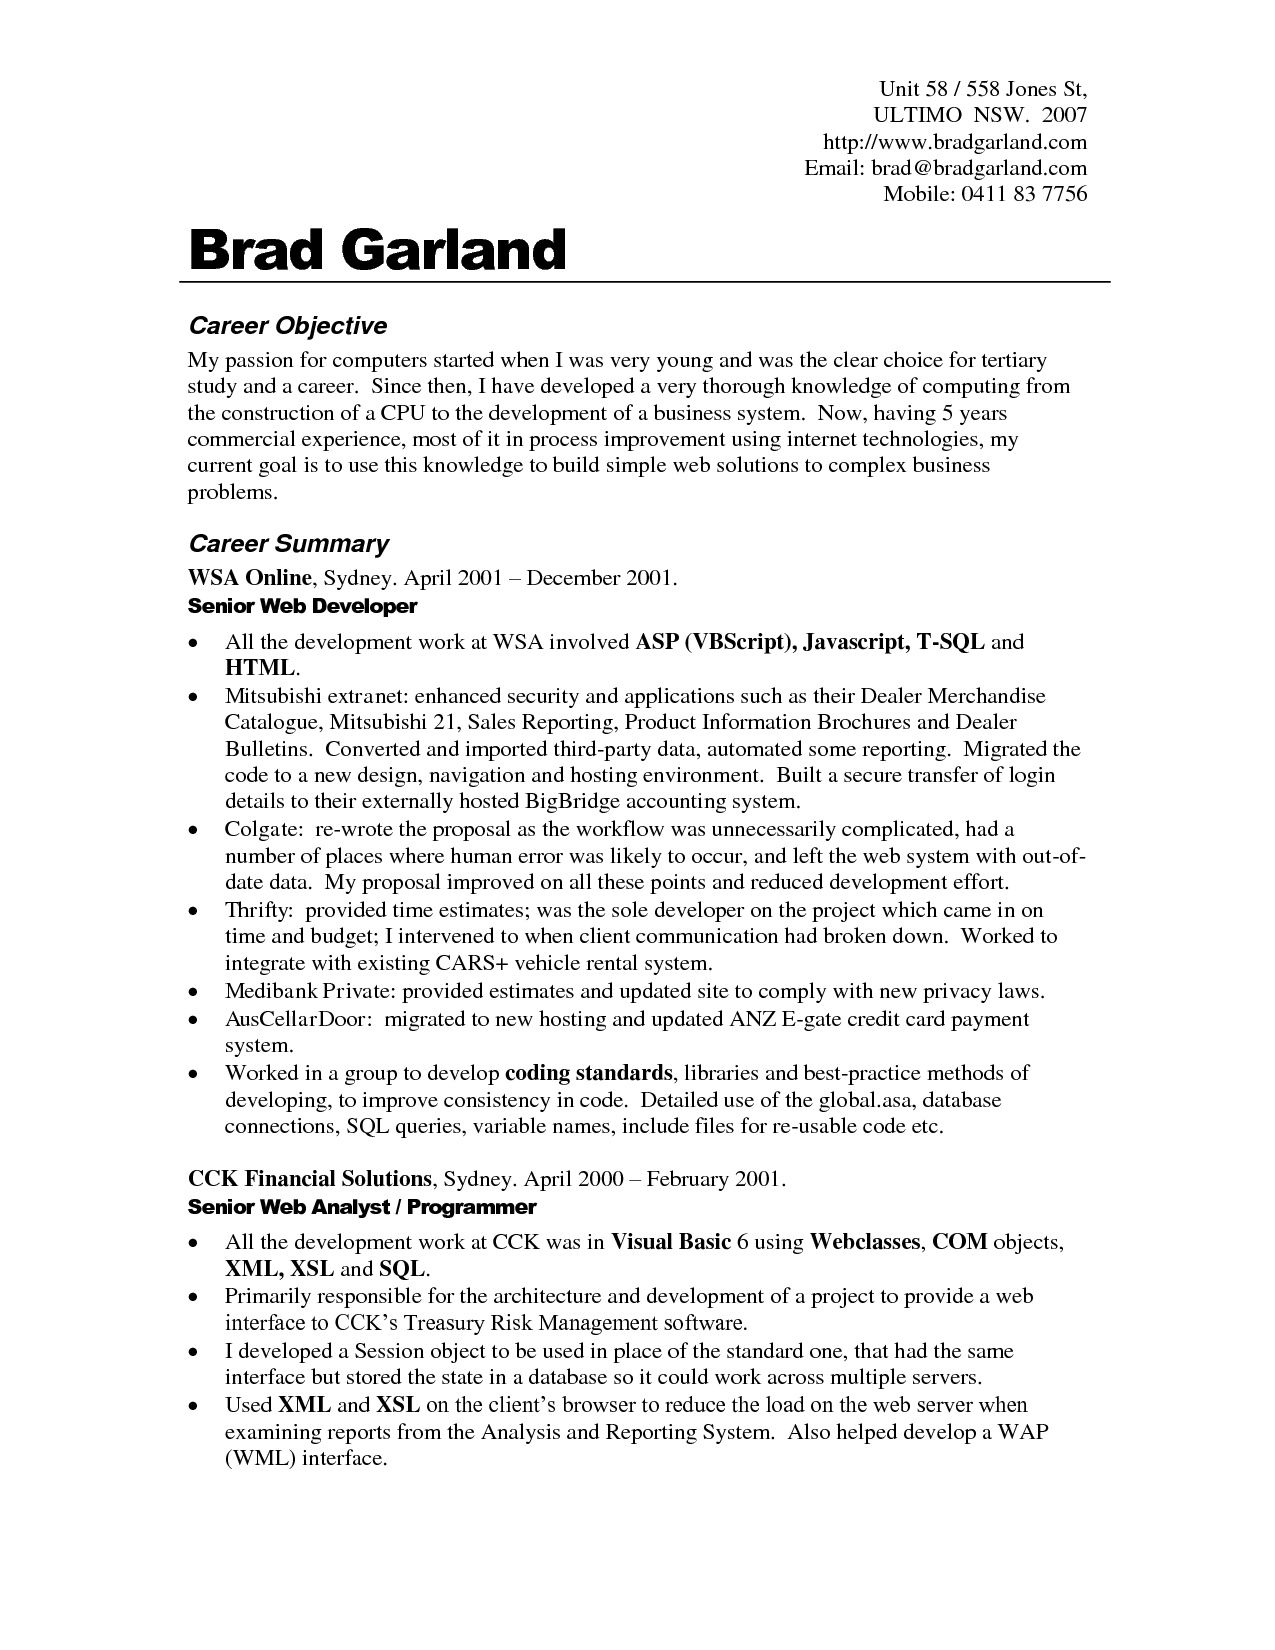 an example of a resume for a job